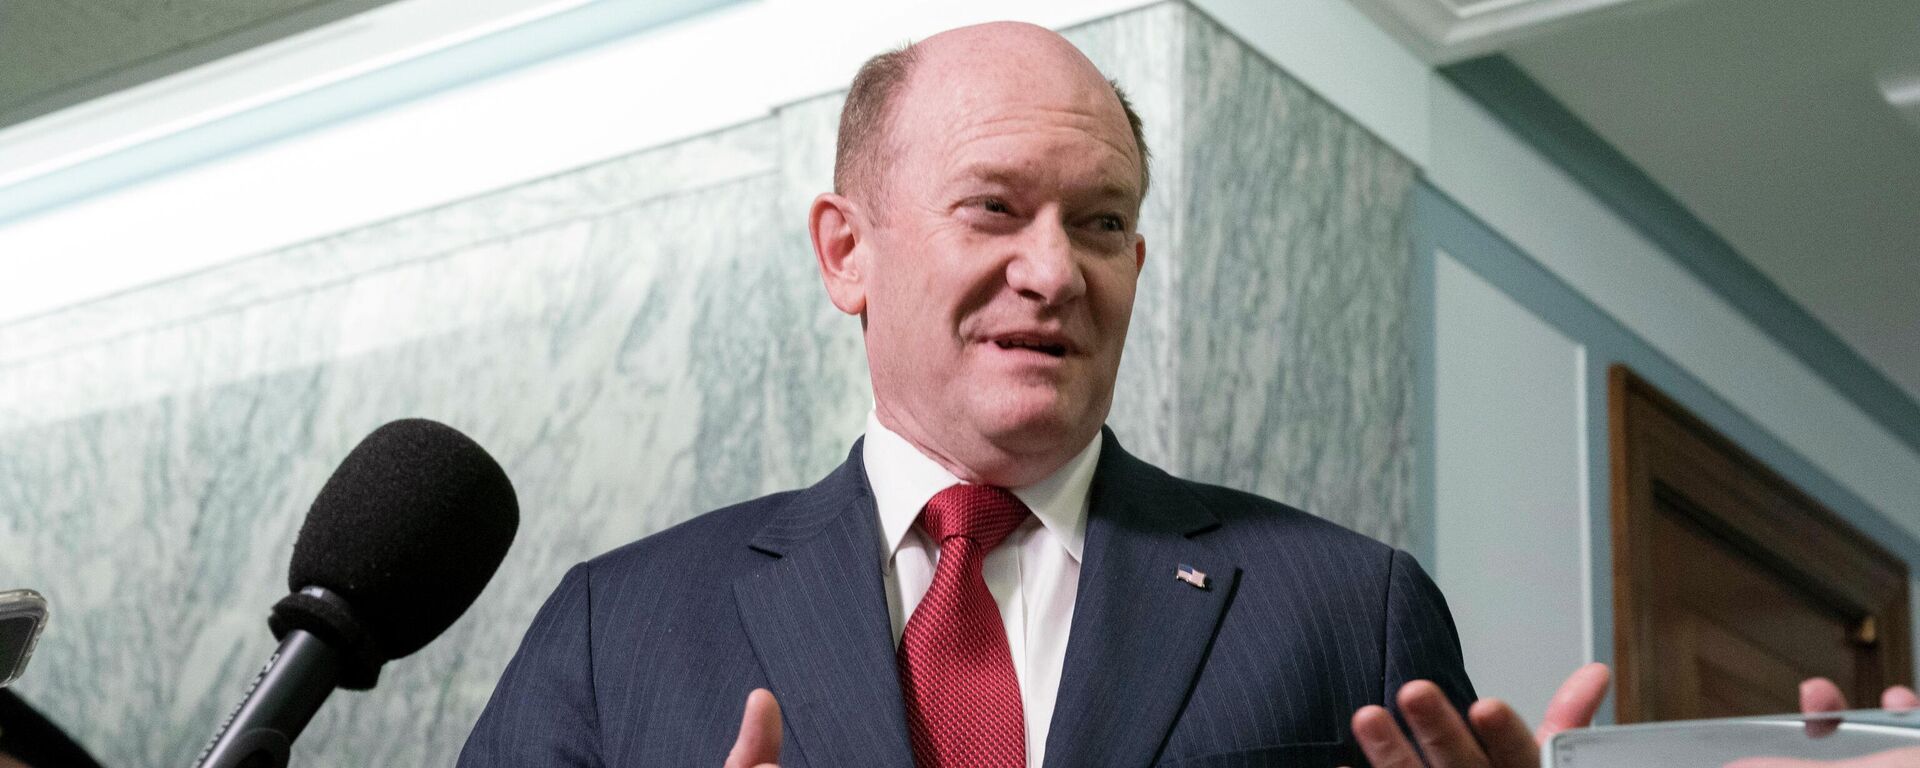 Sen. Chris Coons, D-Del., speaks to reporters after a break during the nomination hearing of Supreme Court nominee Ketanji Brown Jackson, during the third day of her confirmation hearing before the Senate Judiciary Committee, on Capitol Hill, Wednesday, March 23, 2022, in Washington. - Sputnik International, 1920, 18.04.2022